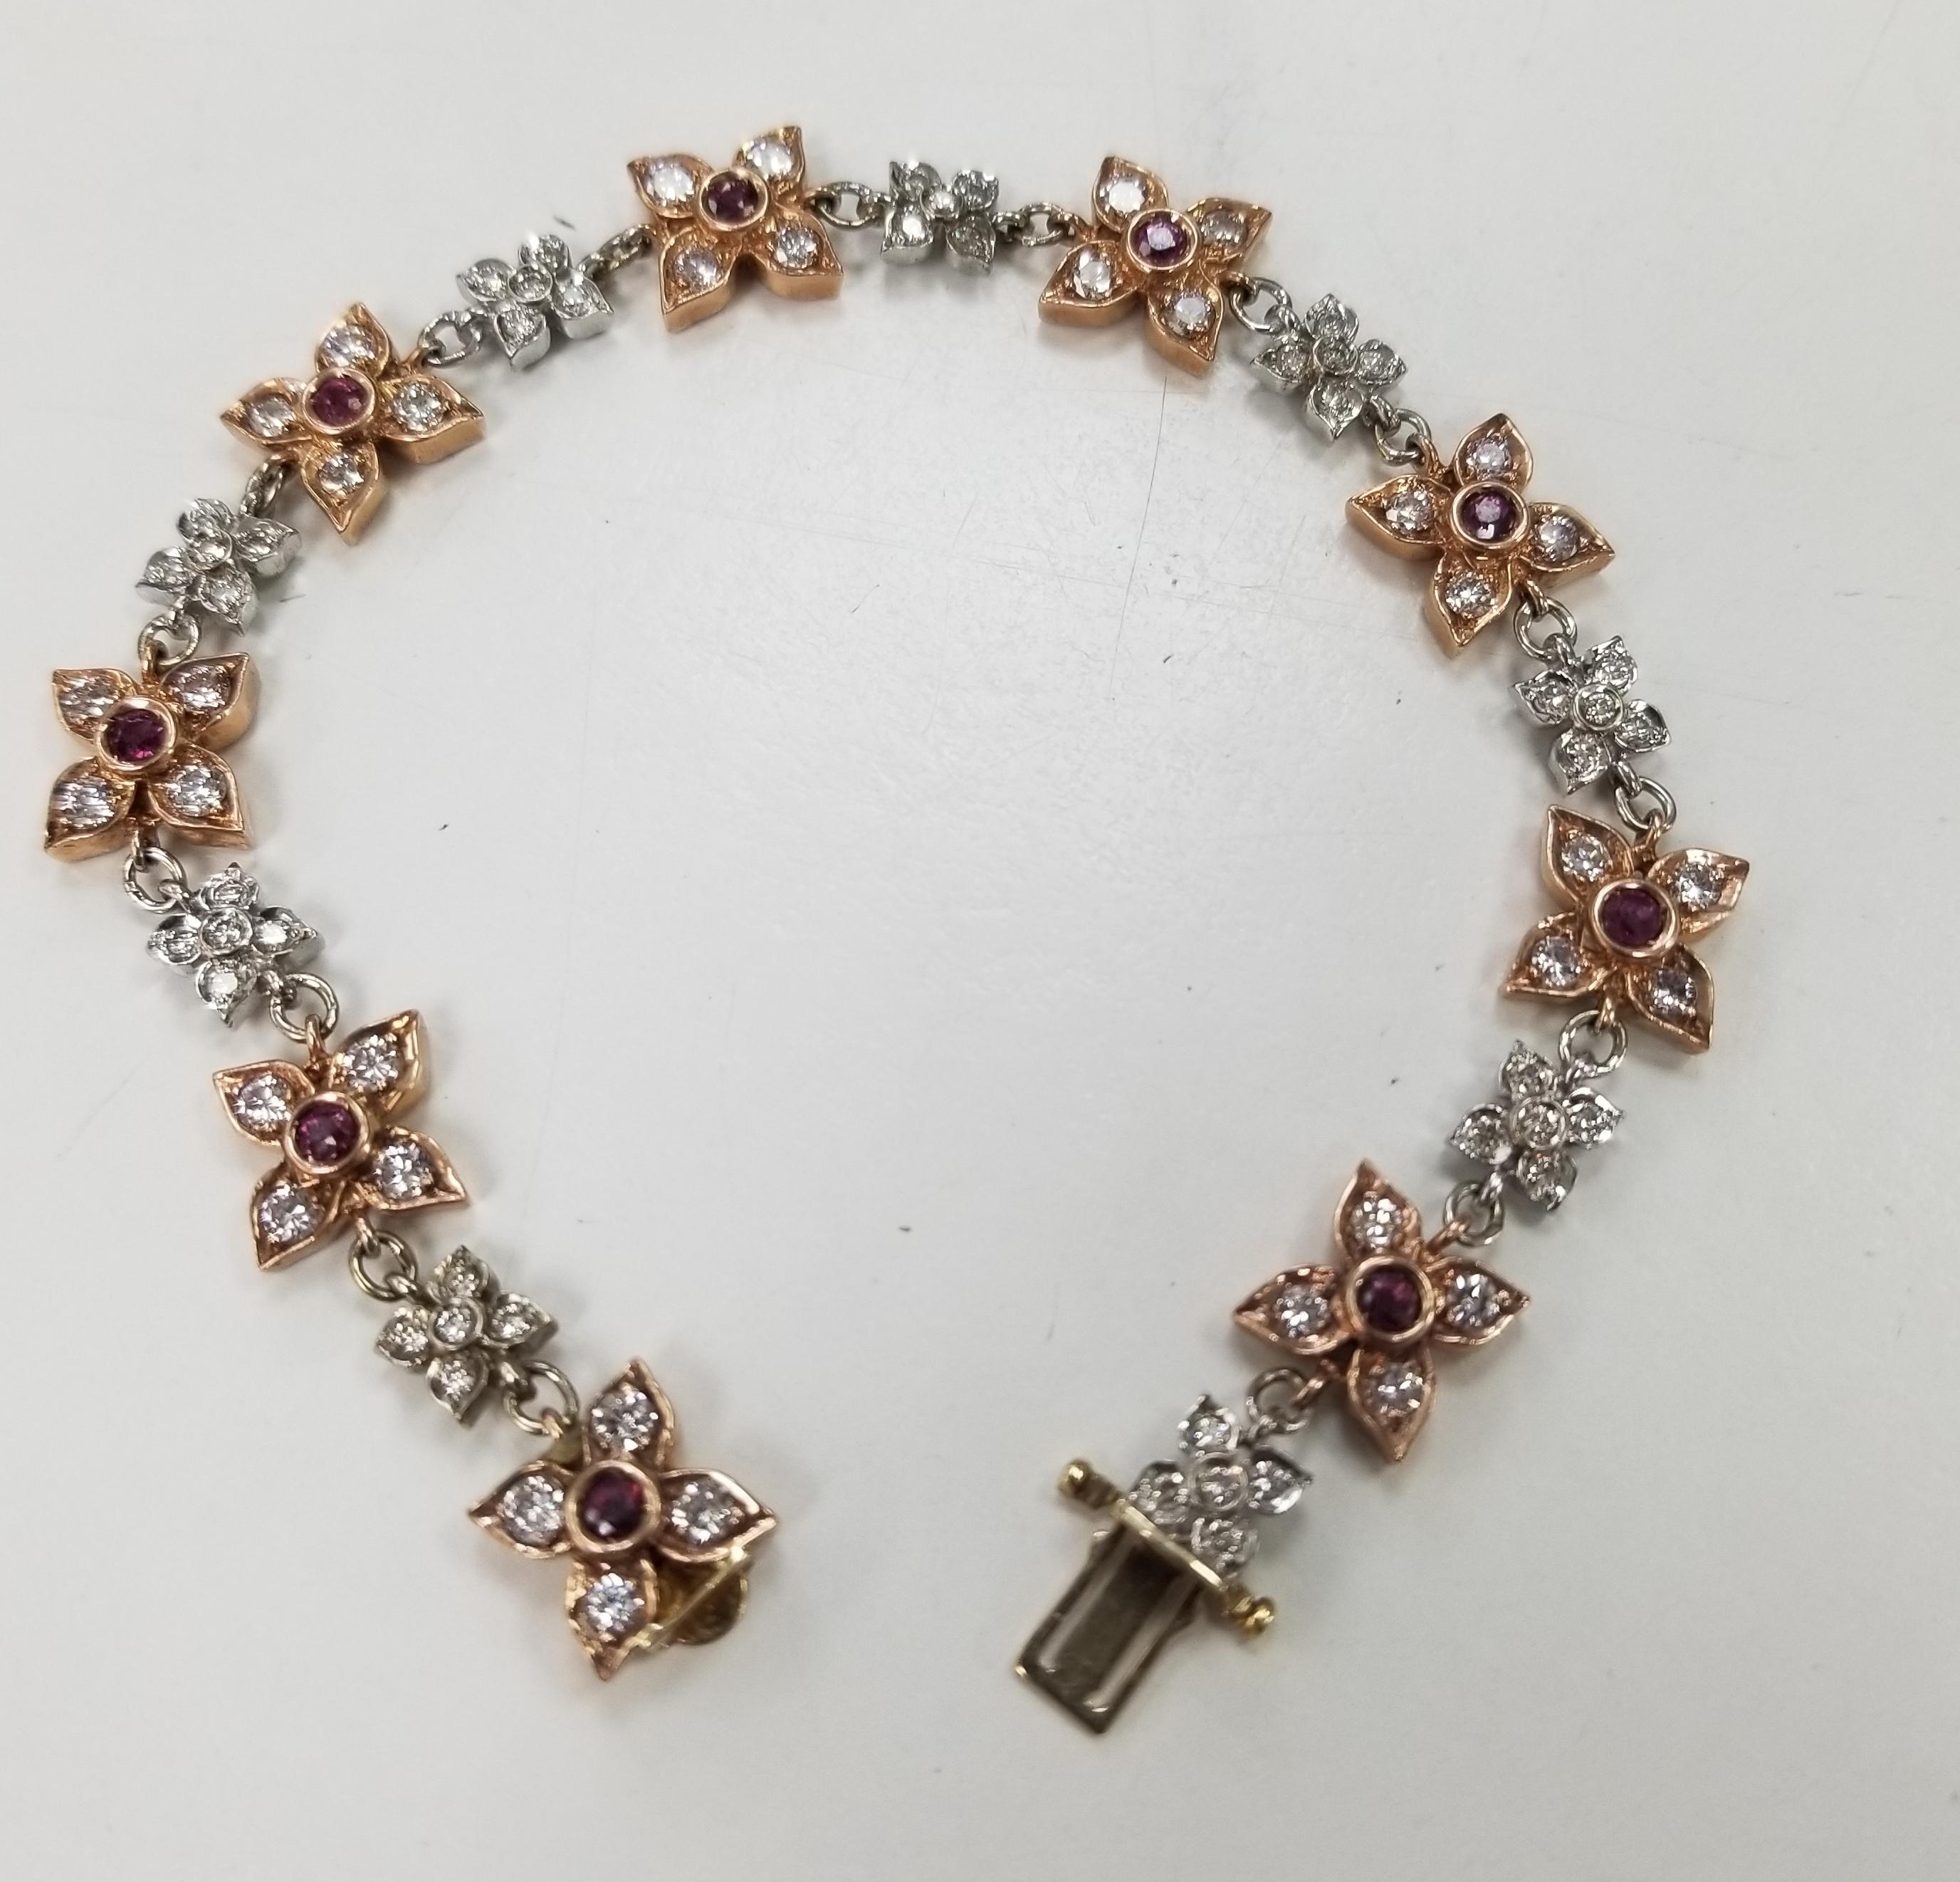 14k rose-white gold ruby and diamond floral bracelet, containing 81 round full cut diamonds of very fine quality weighing 2.16cts. and 9 round rubies of gem quality weighing .90pts. bracelet measures 7.25 inches.